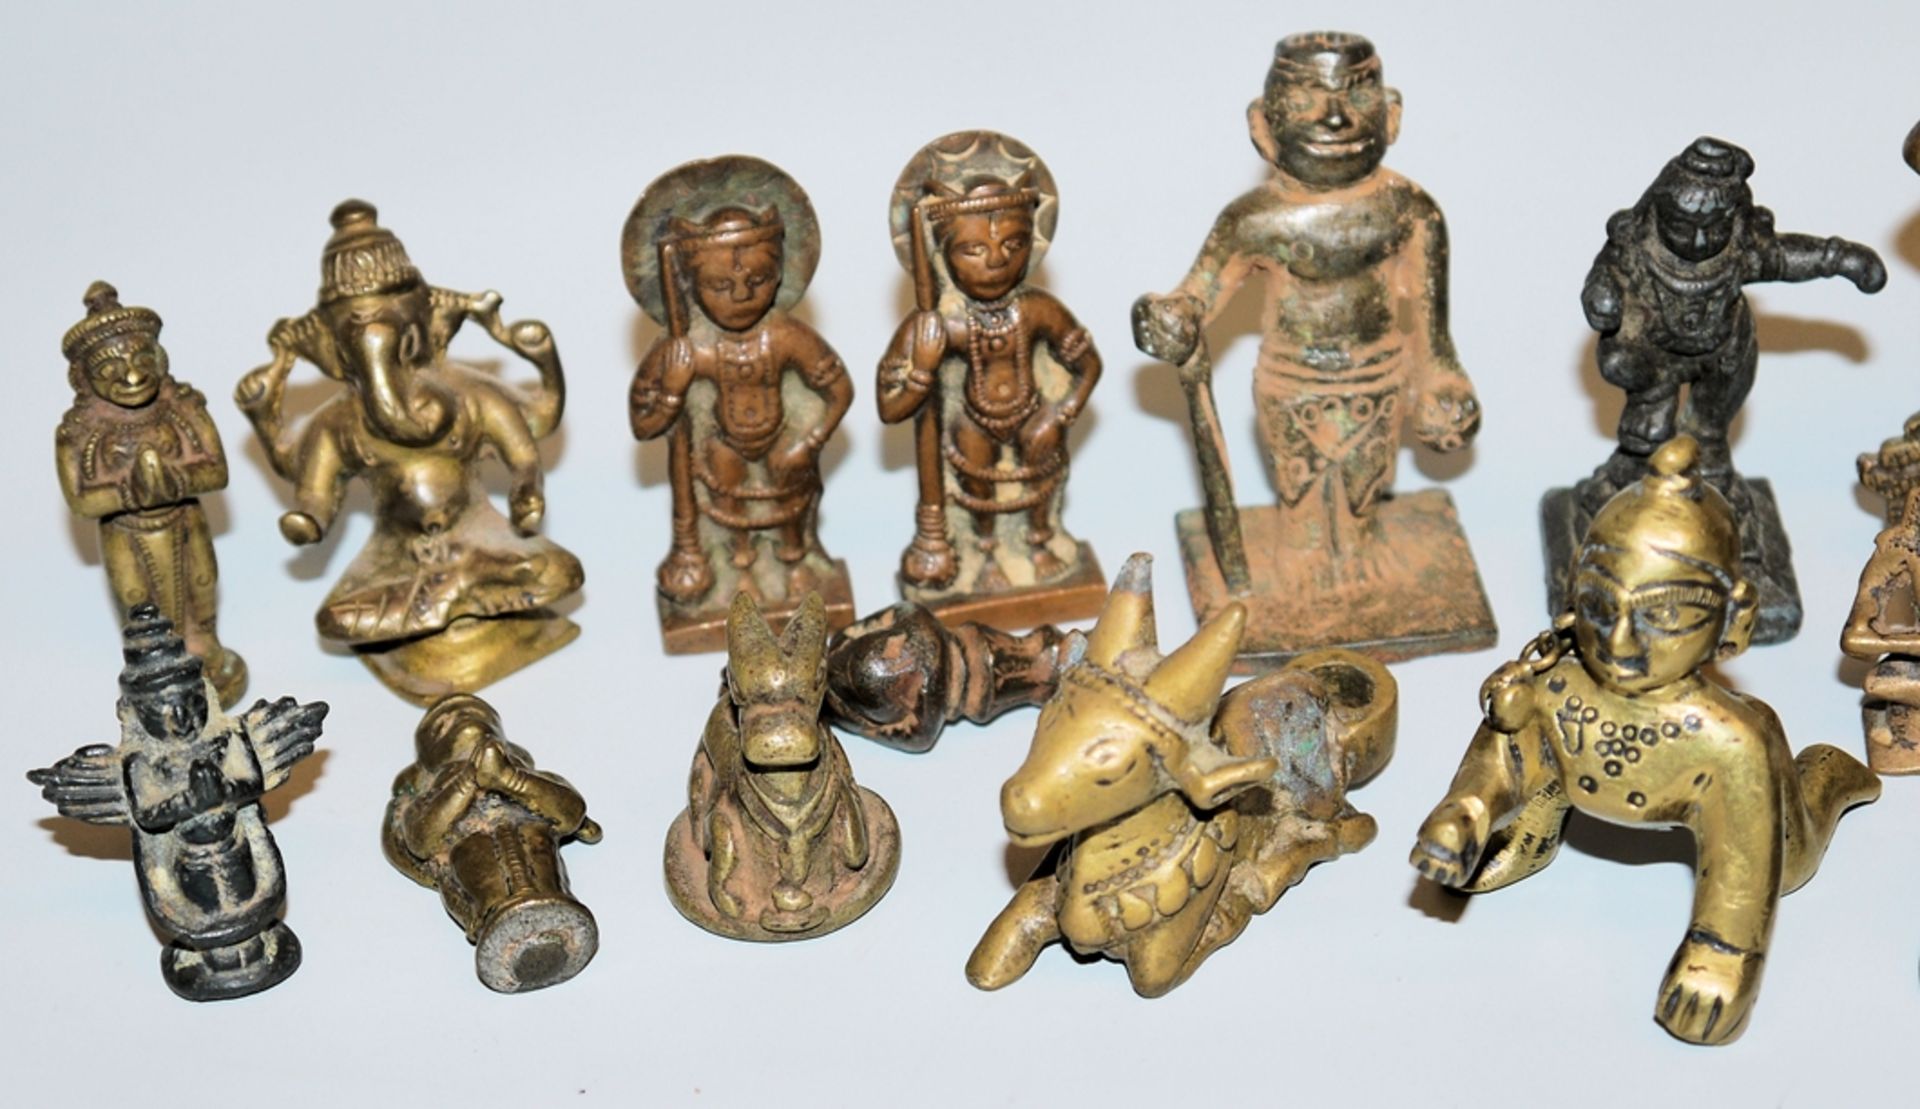 24 small and miniature bronzes of Hindu deities, India 18th & 19th century - Image 2 of 3